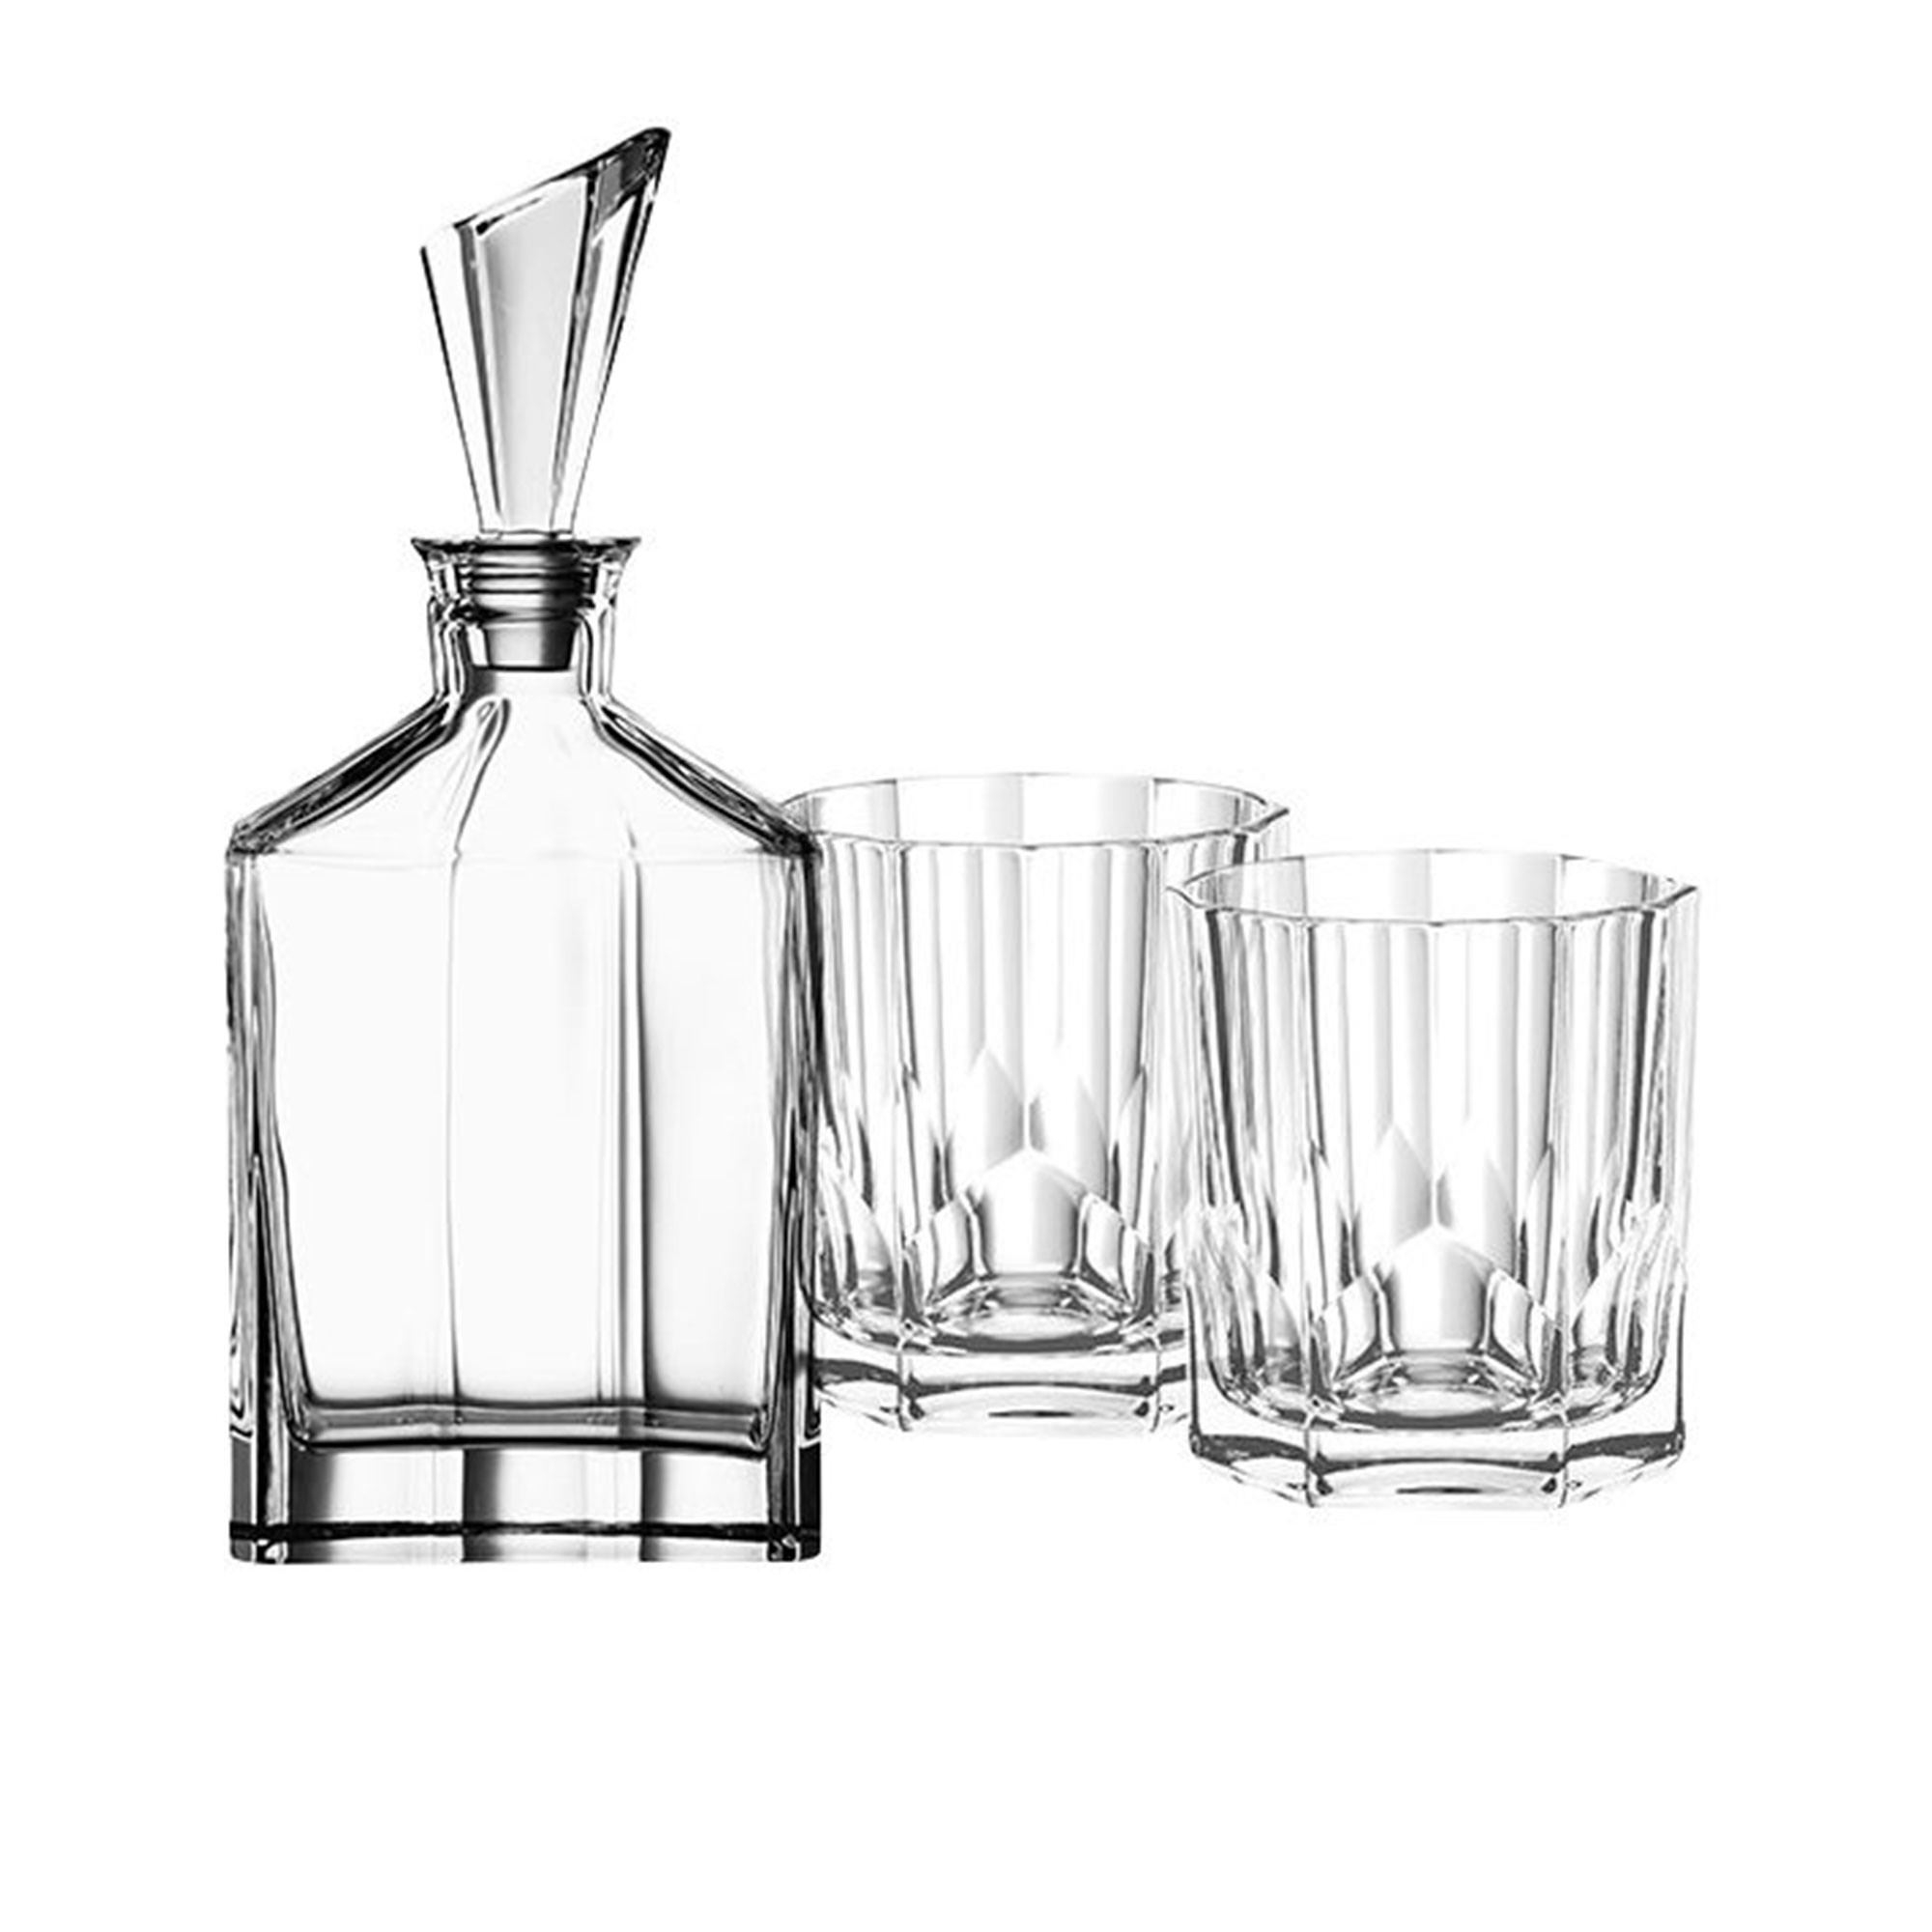 Nachtmann Aspen Whiskey Glass and Decanter Set 3pc Image 1